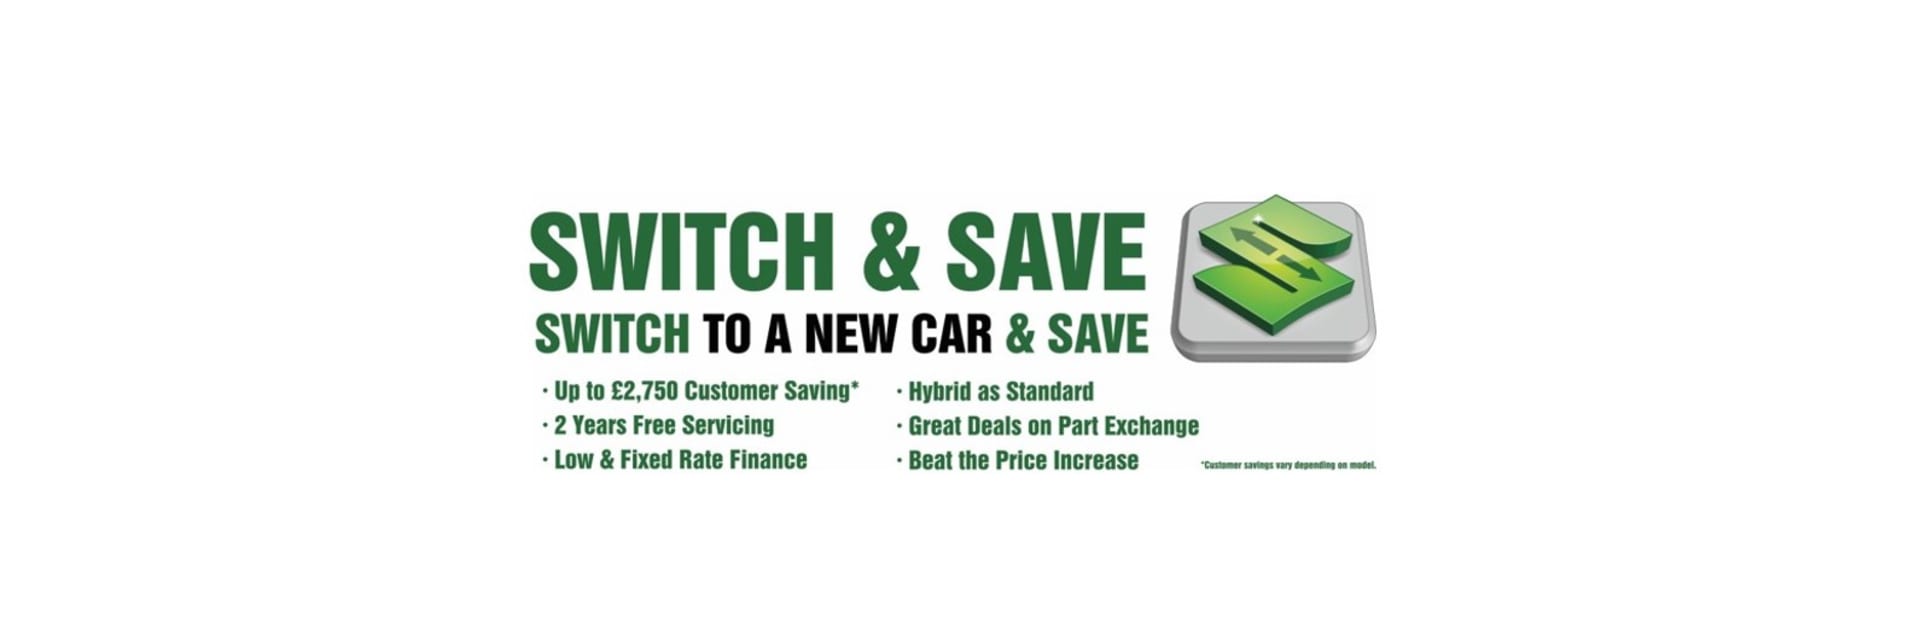 Switch and save 2 